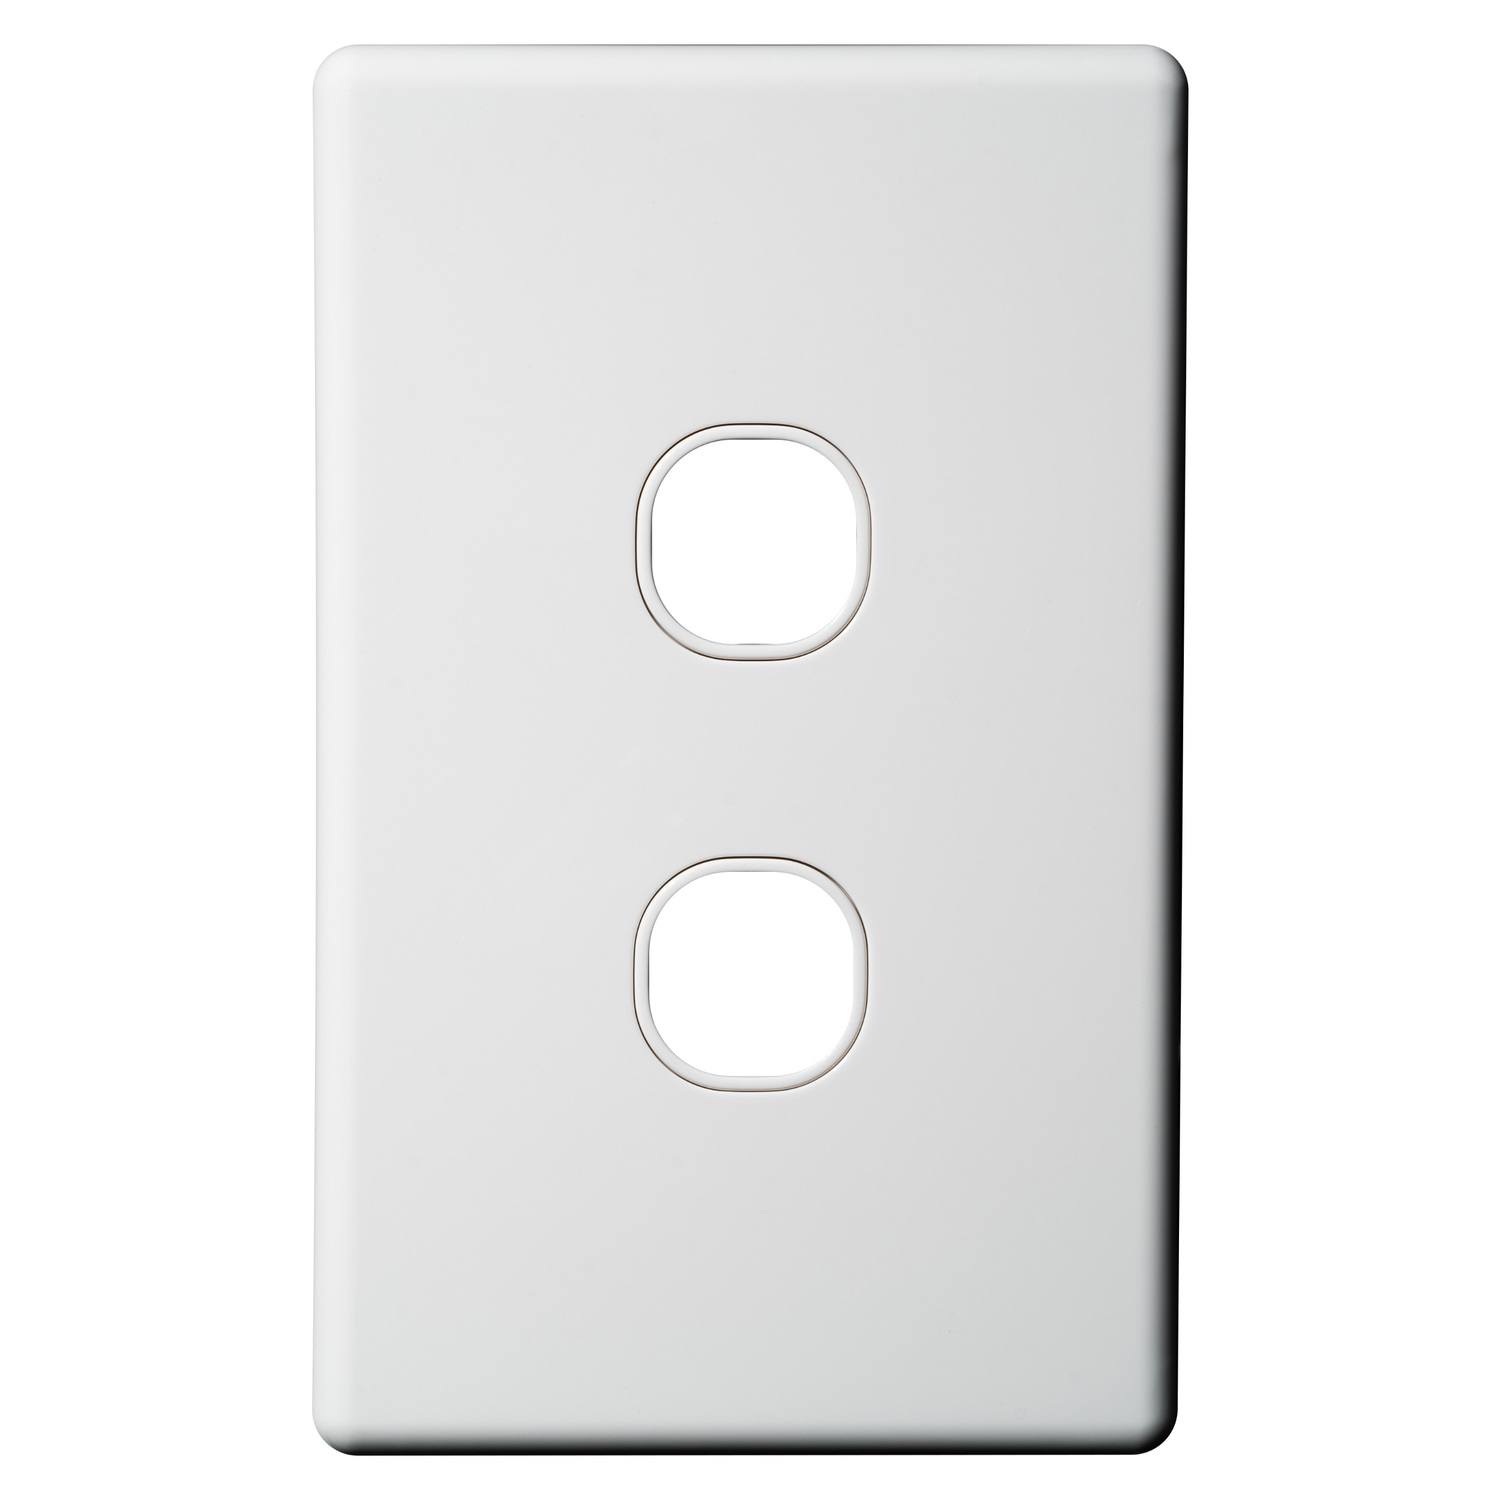 2 gang switch plate